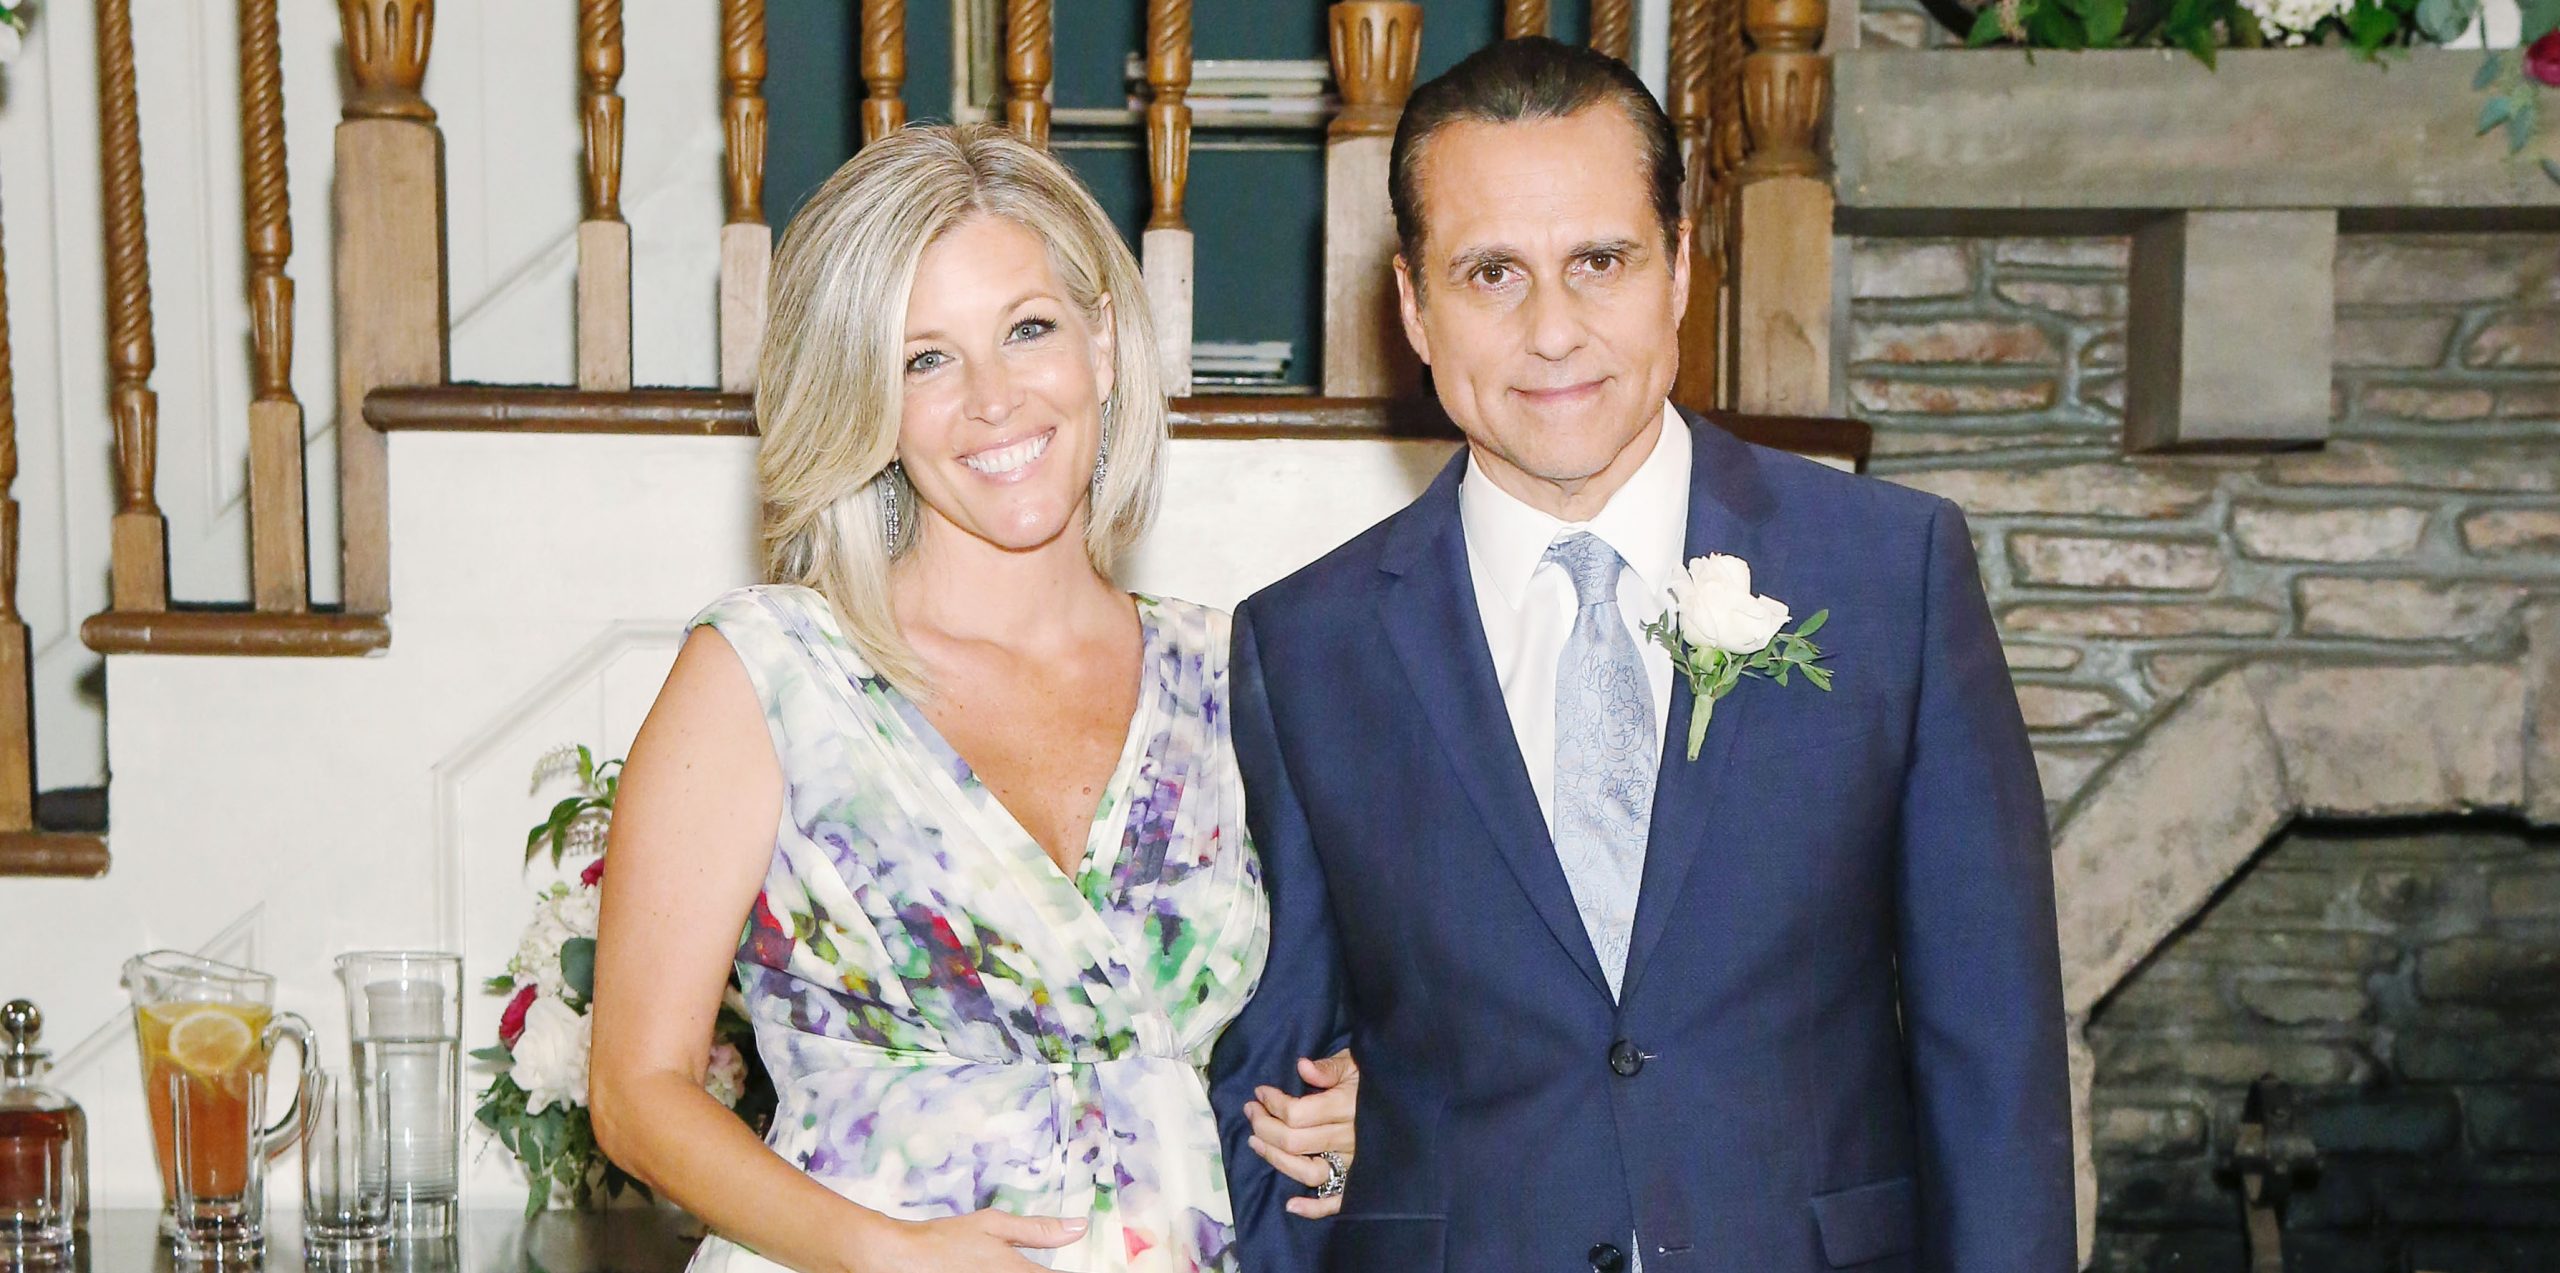 See Carly and Jason's wedding photo from General Hospital